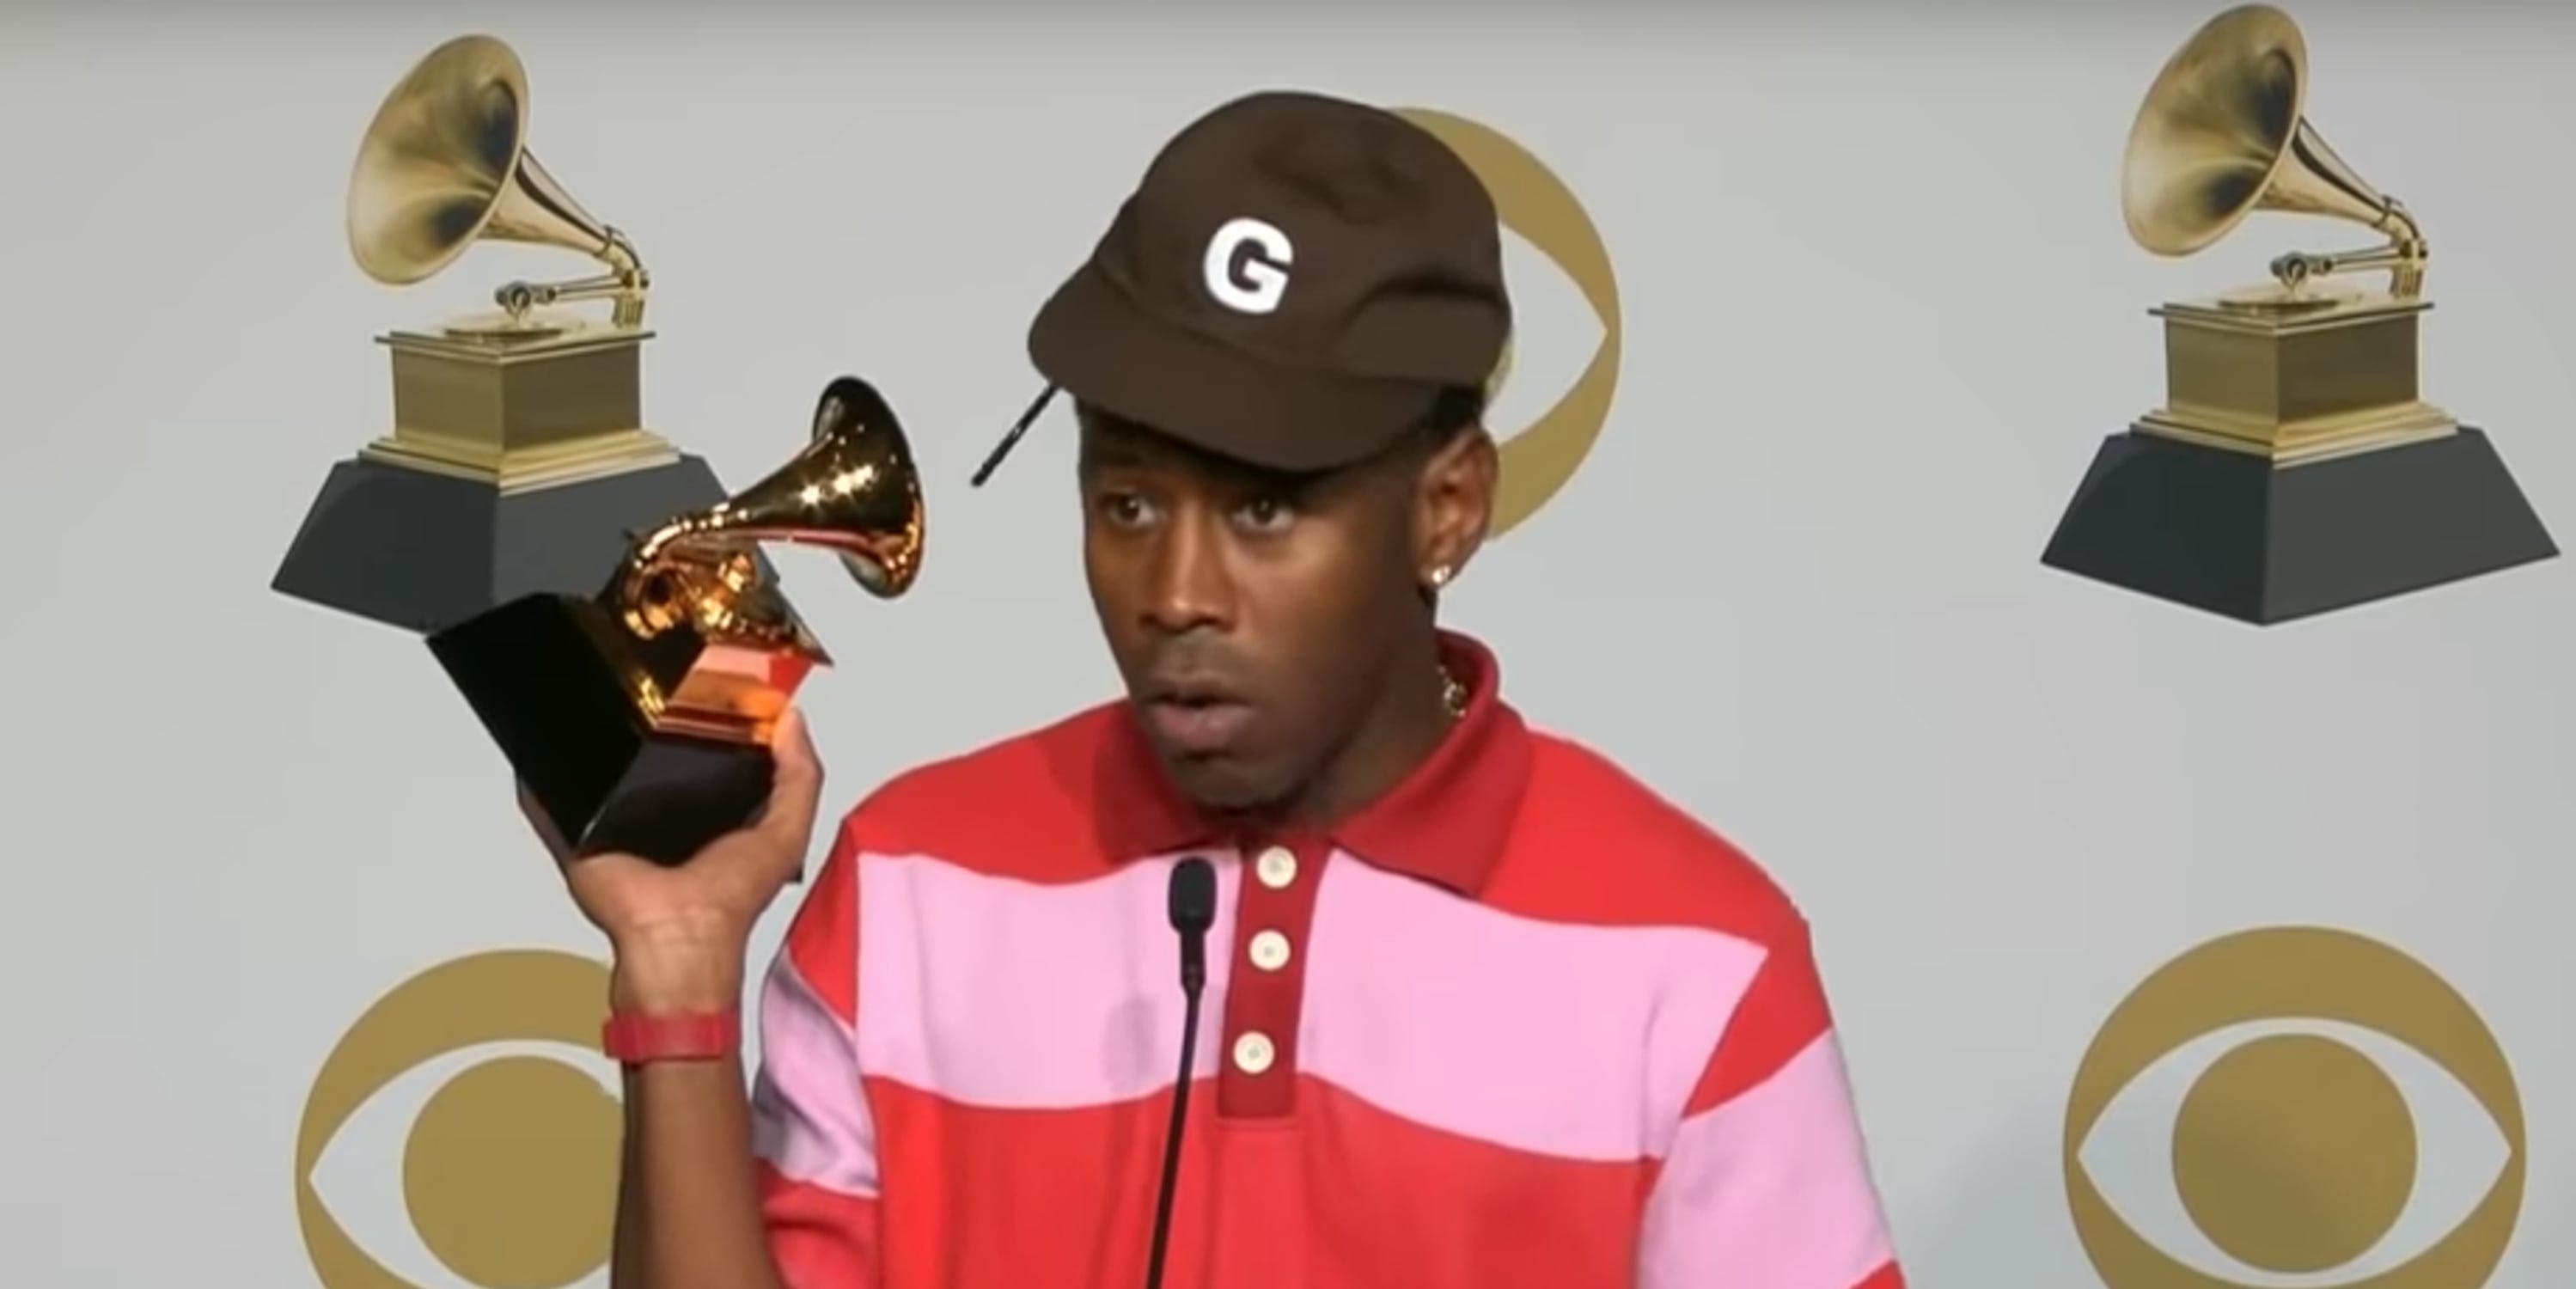 Twitter Reacts to Tyler, the Creator's Grammys Performance